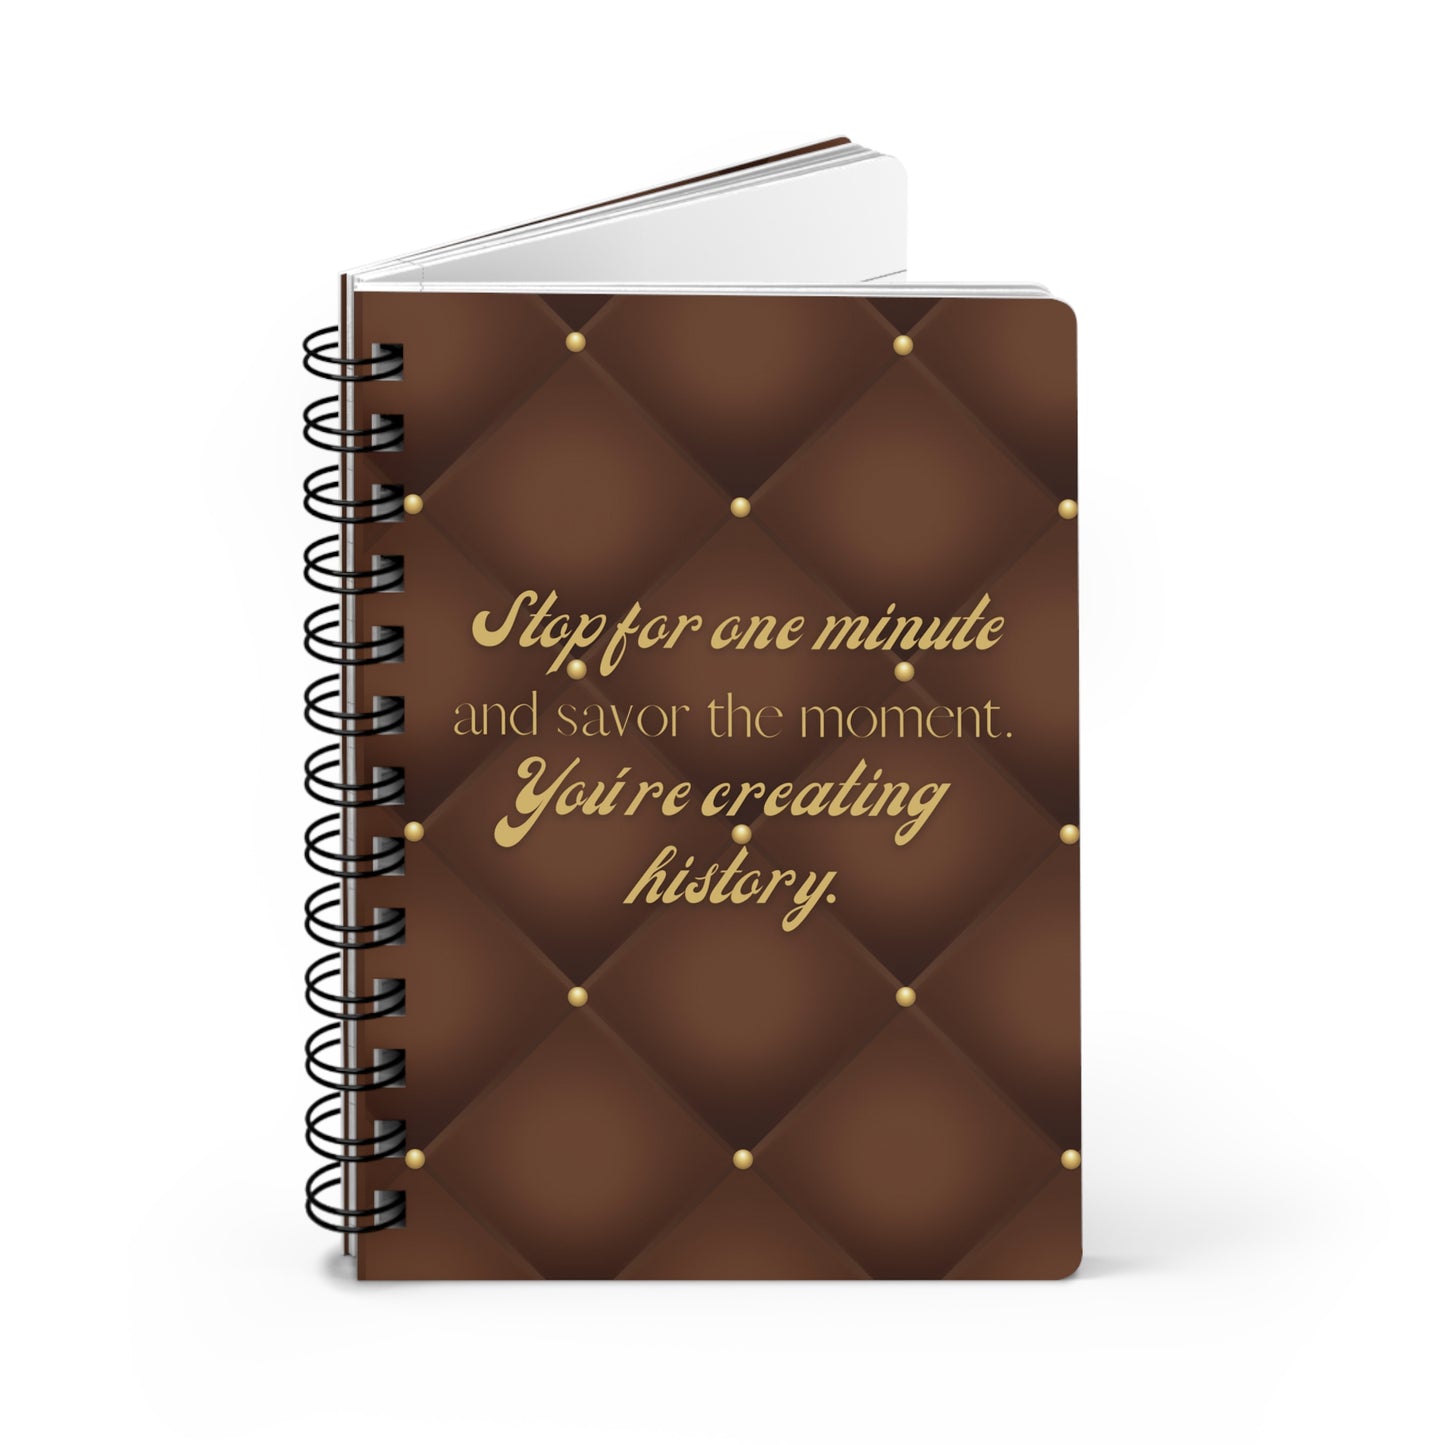 Stop for one minute Tufted Print Brown and Gold Spiral Bound Journal